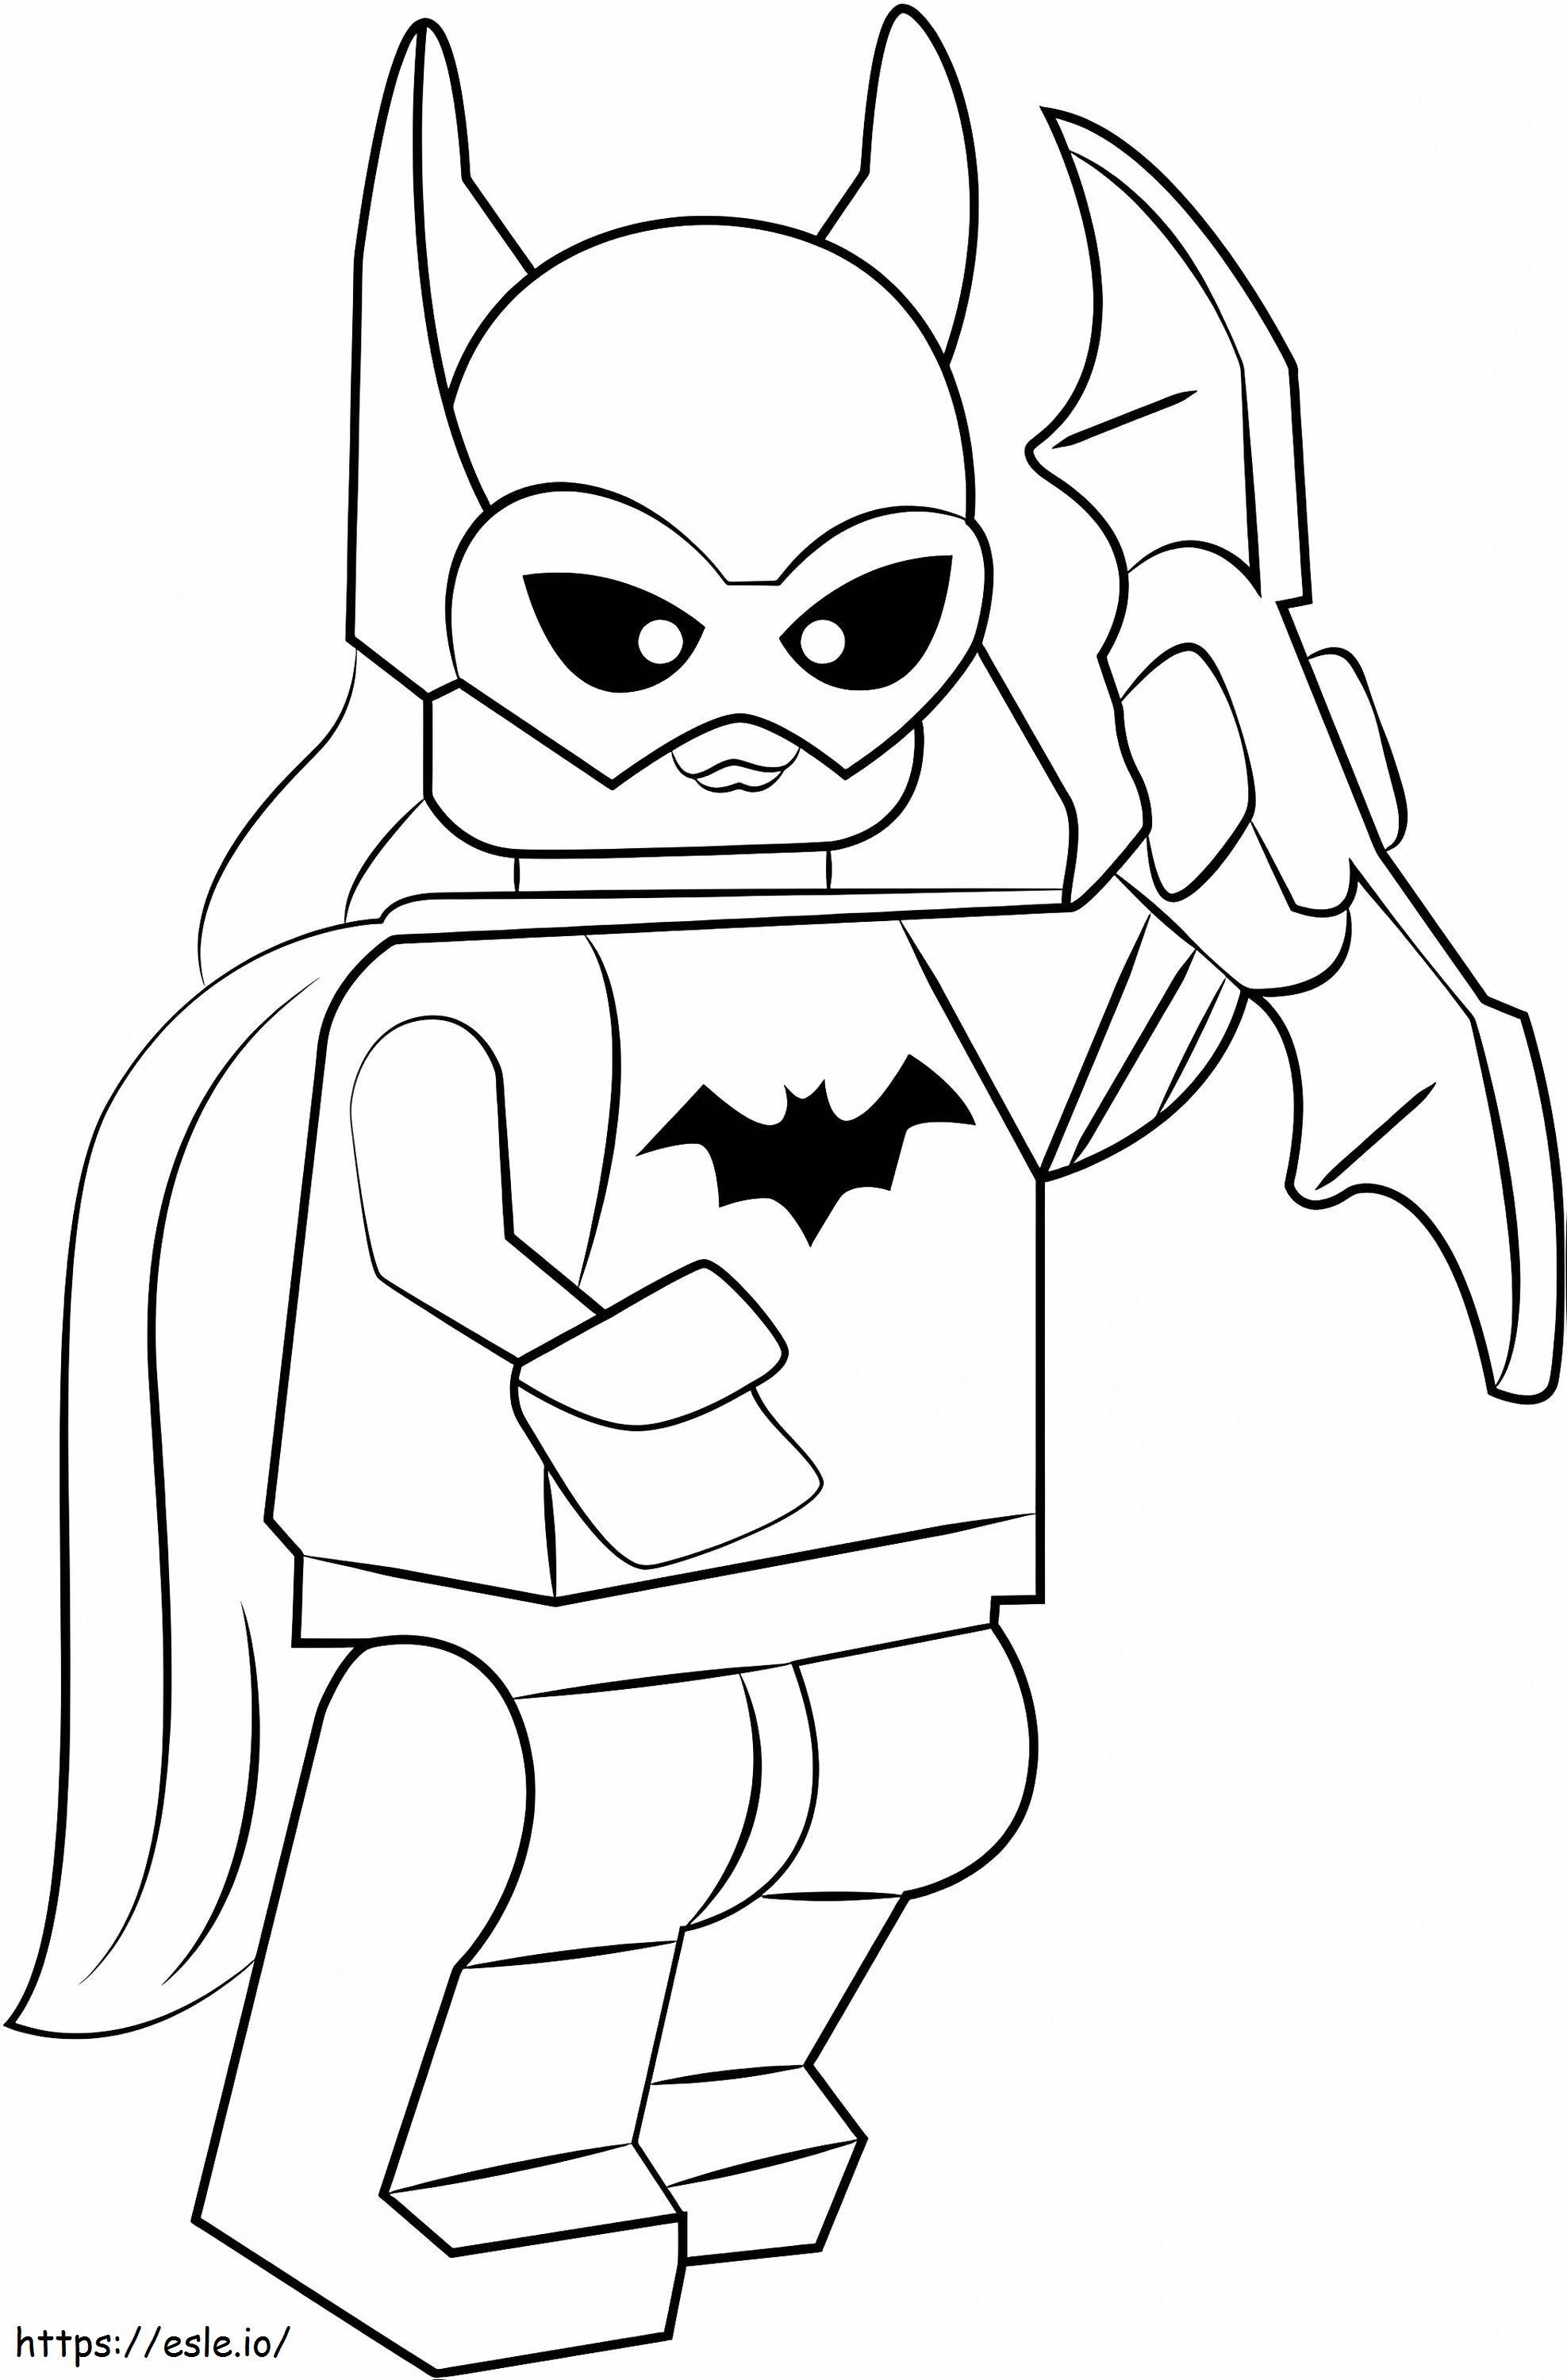 1531108655 Lego Batgirl A4 coloring page